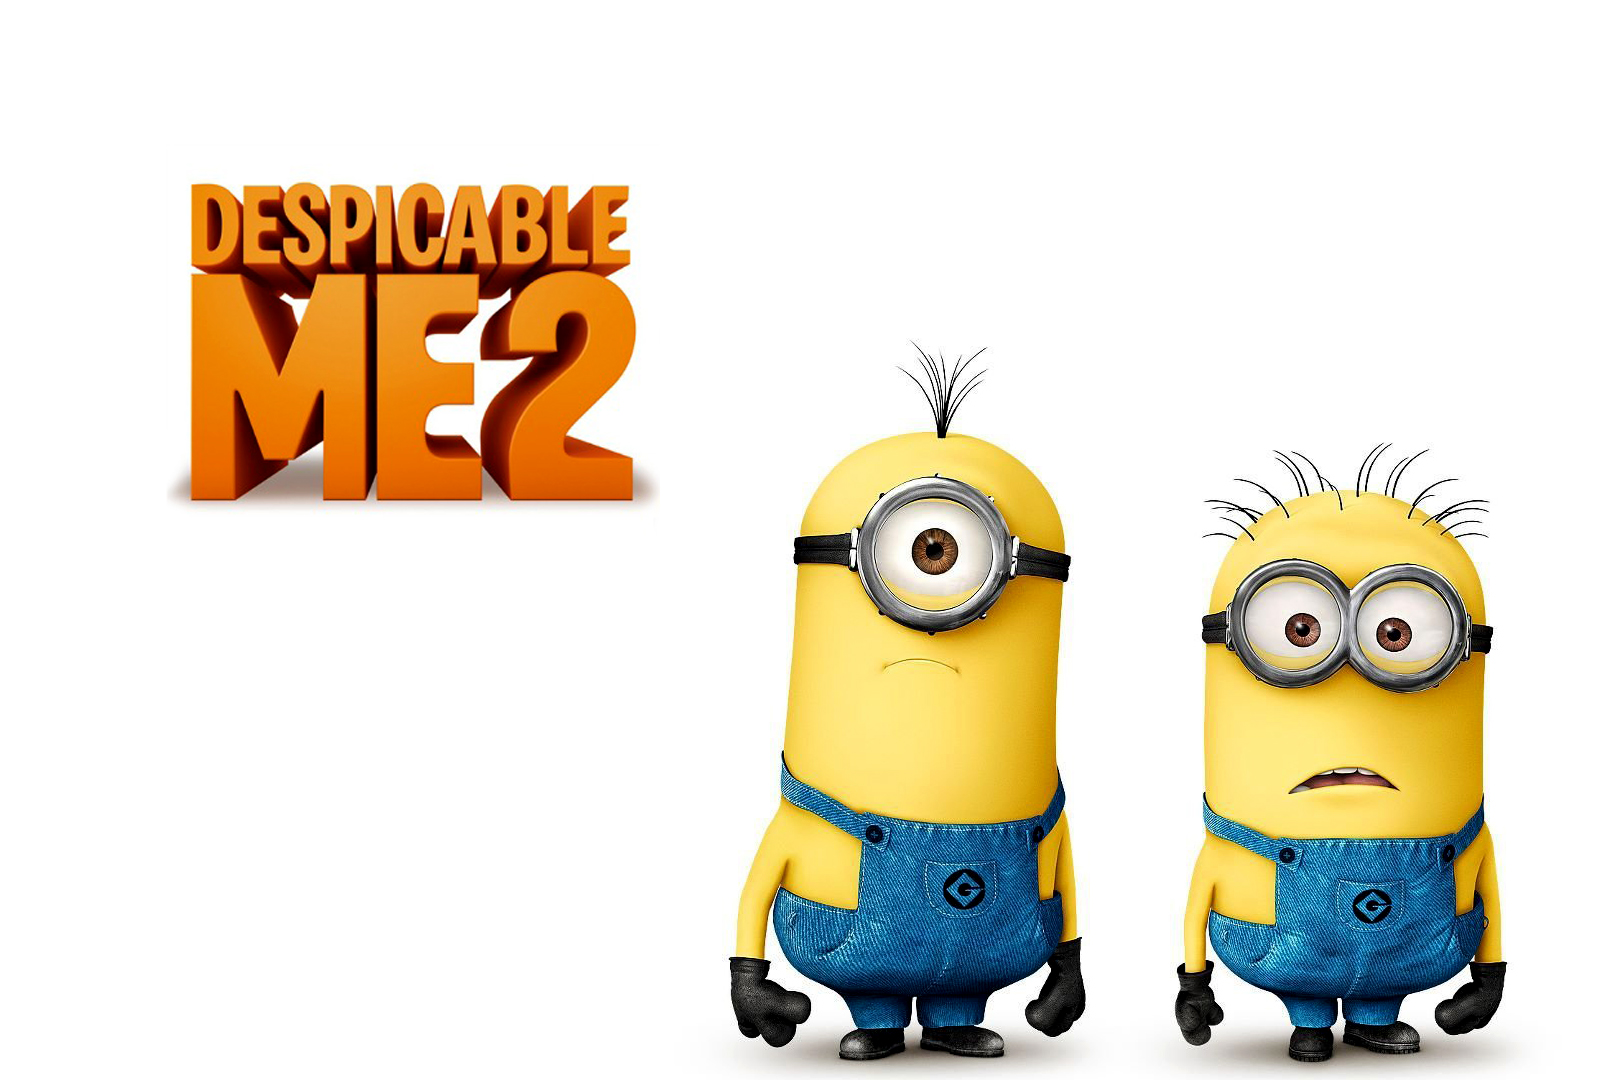 Despicable me 2 wide high quality wallpaper for desktop background